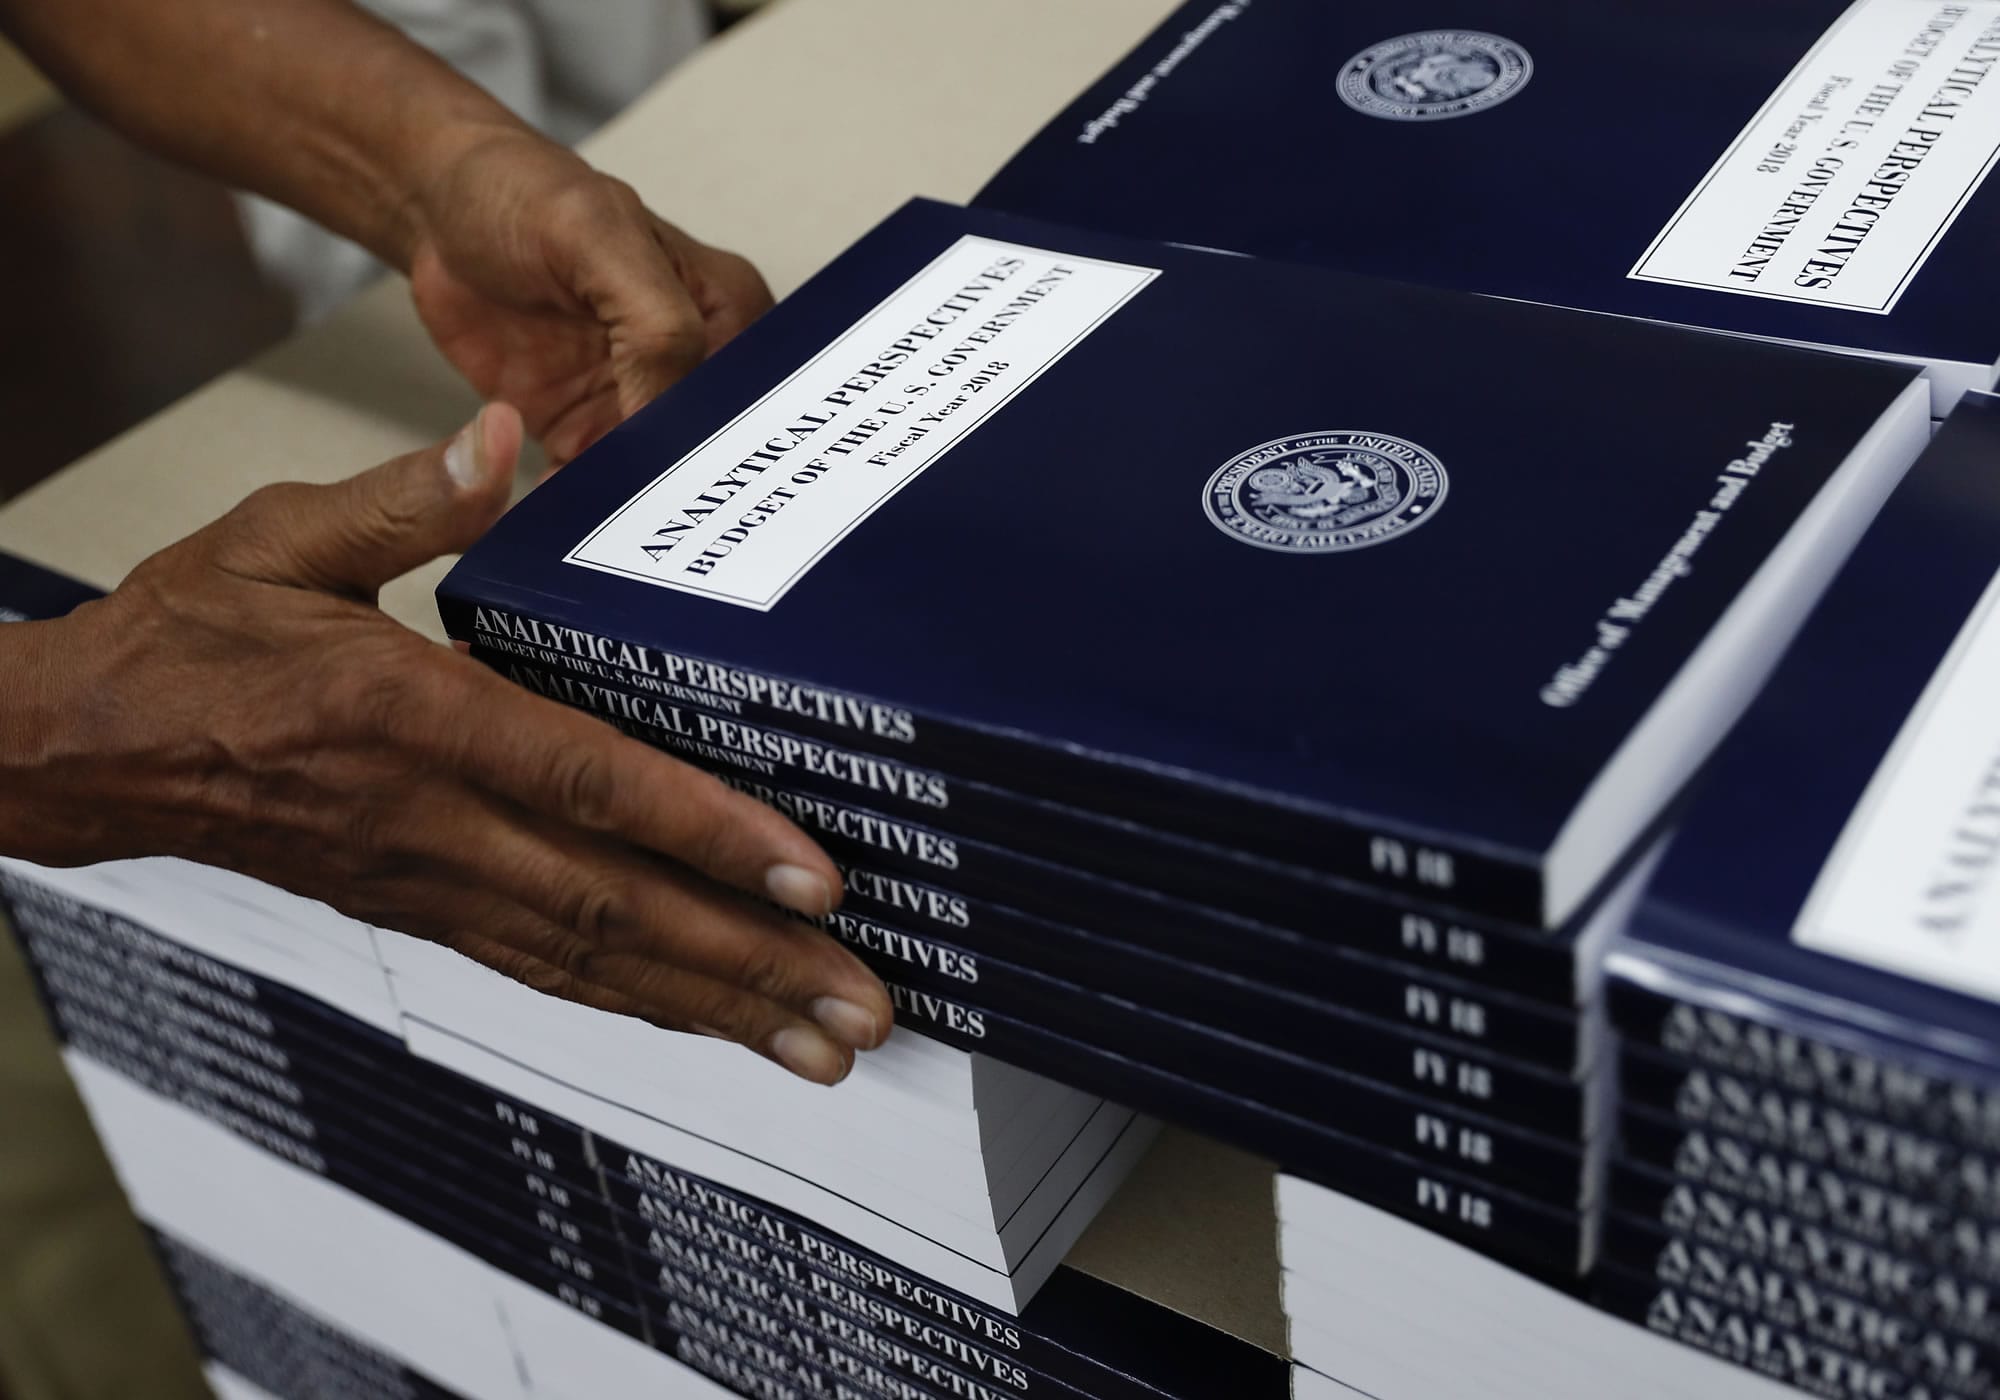 In this photo taken May 19, 2017, a GPO worker stacks copies of "Analytical Perspectives Budget of the U.S. Government Fiscal Year 2018" onto a pallet at the U.S. Government Publishing Office's (GPO) plant in Washington.